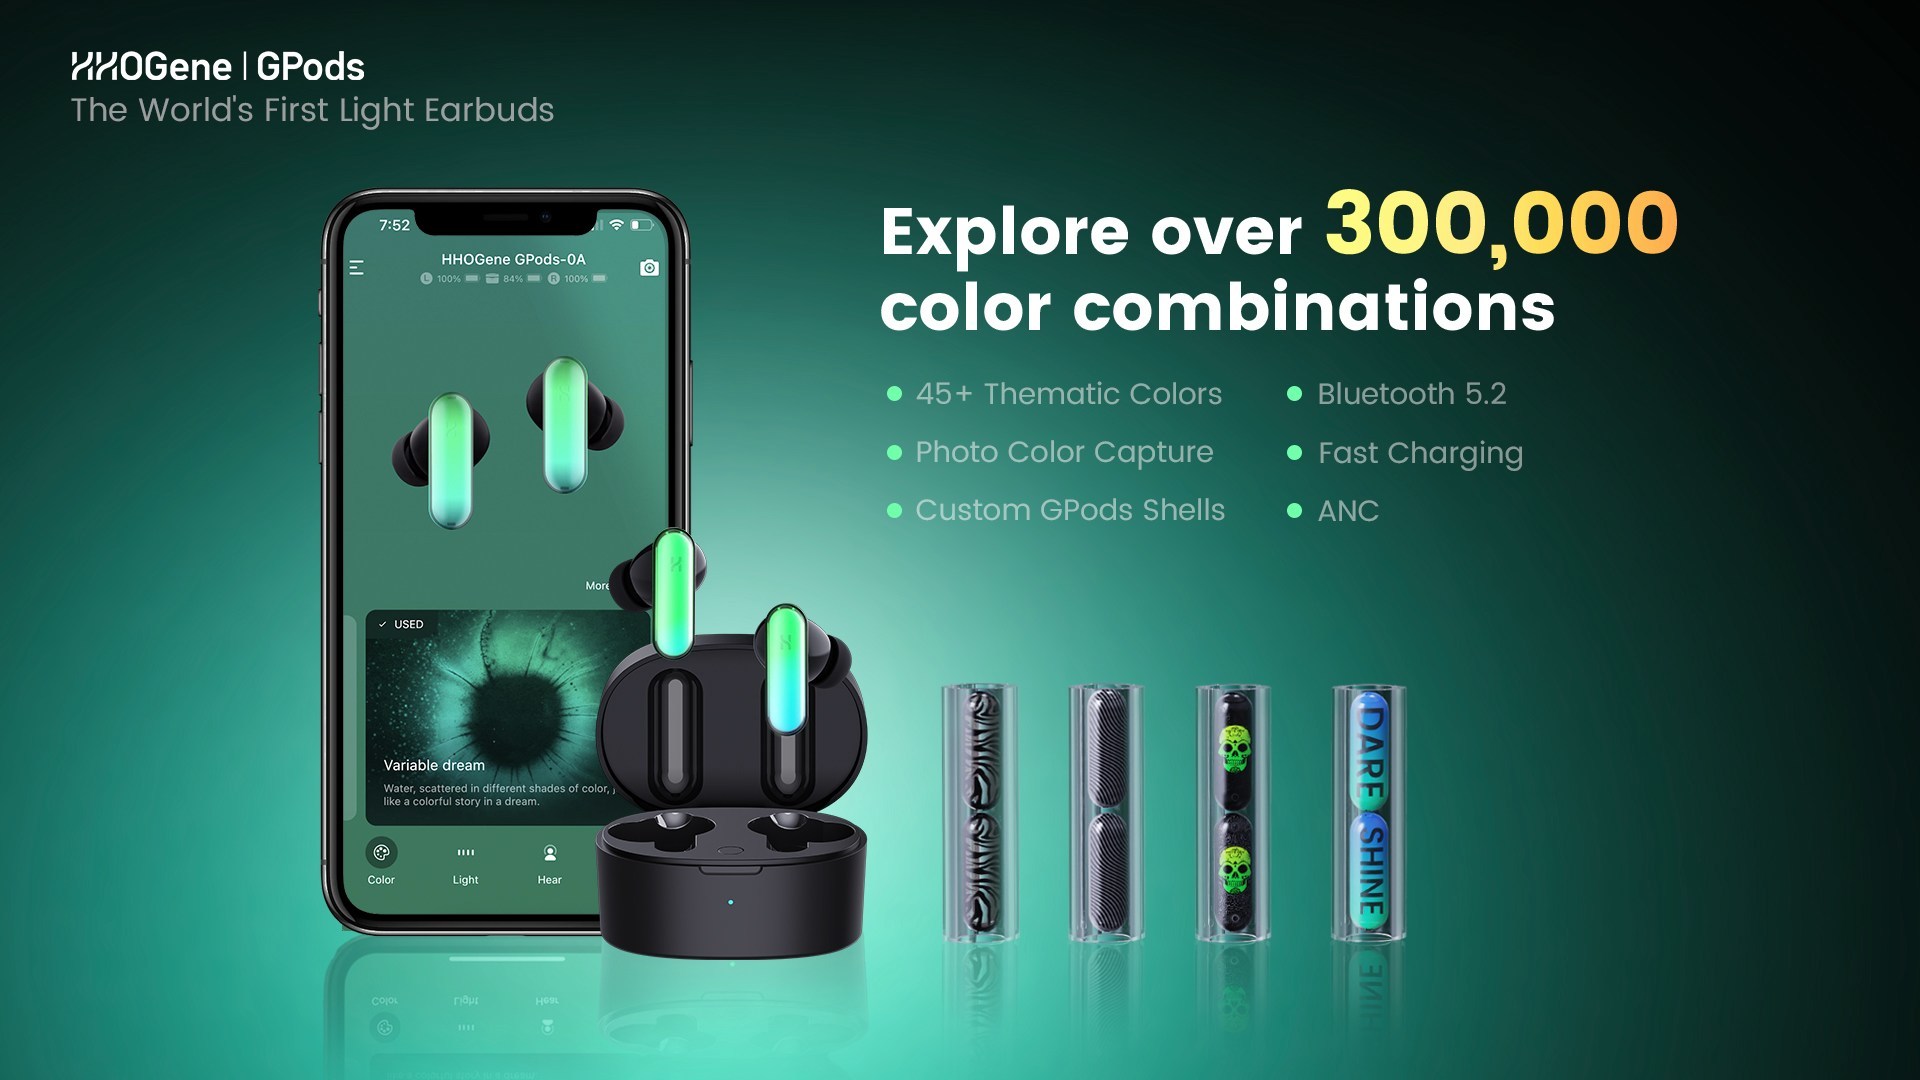 The World’s First Light Earbuds HHOGene GPods Amazed the Market